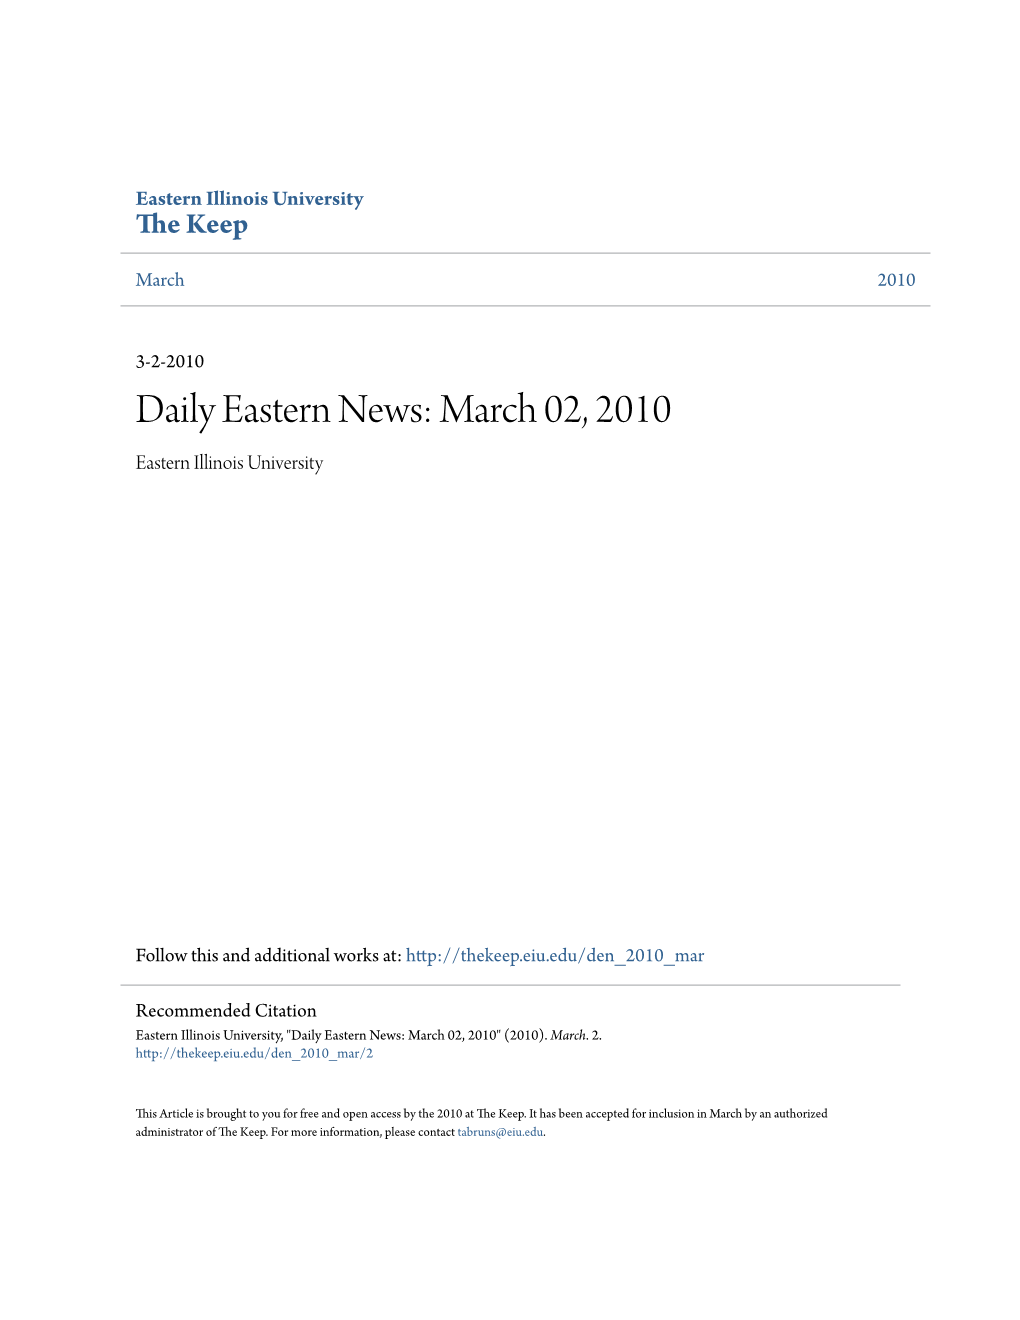 Daily Eastern News: March 02, 2010 Eastern Illinois University